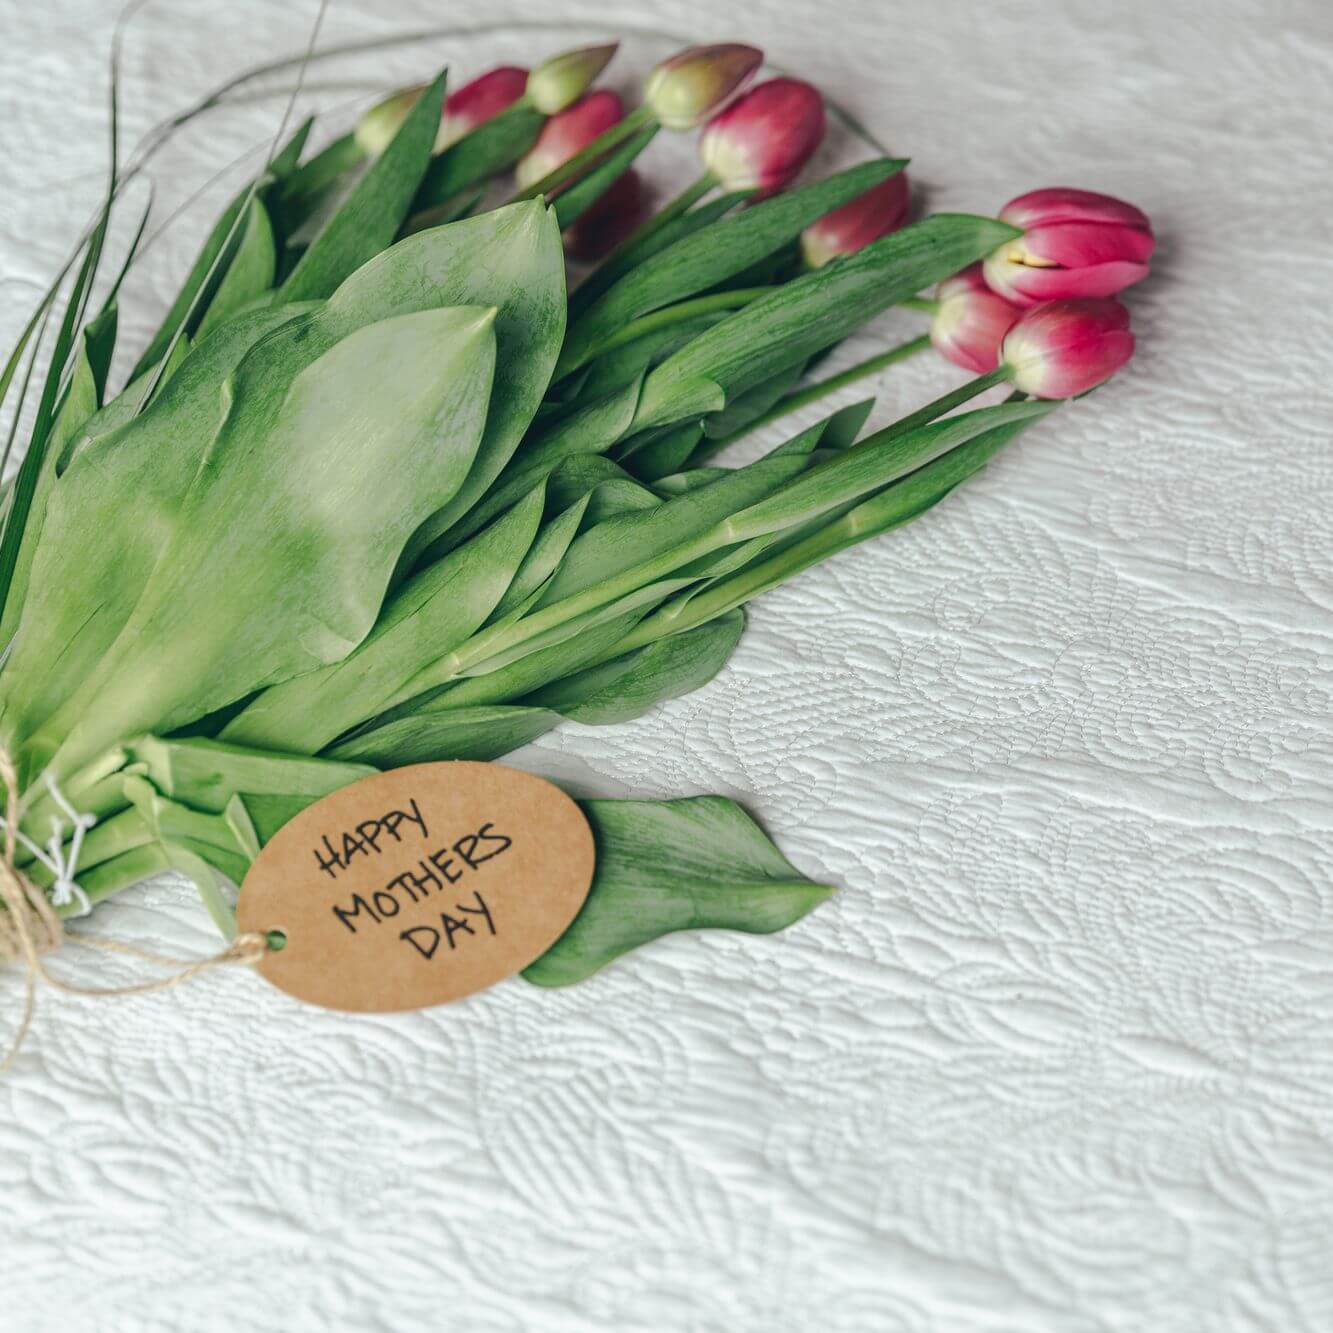 A gift tag saying "Happy Mothers Day" on top of a bunch of flowers